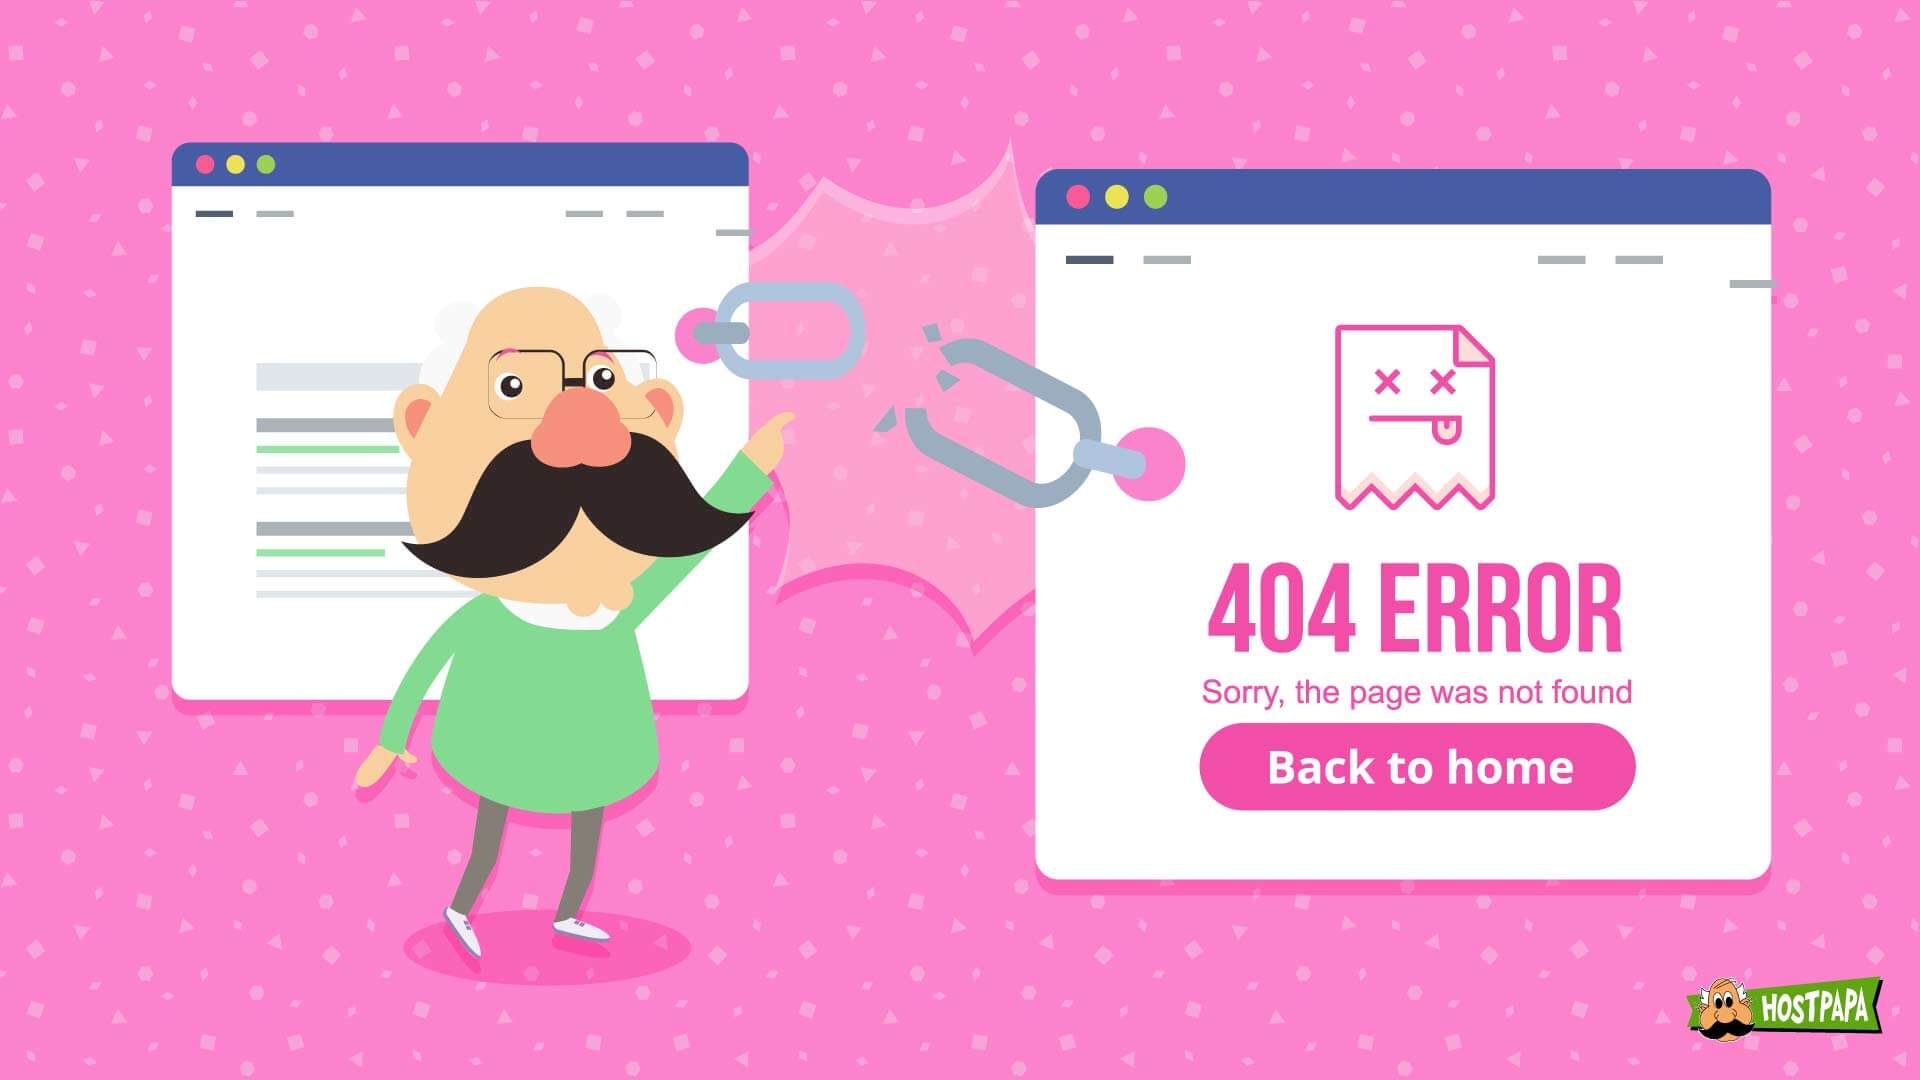 Learn from our 500 Error page. Lots of websites make funny 500 or